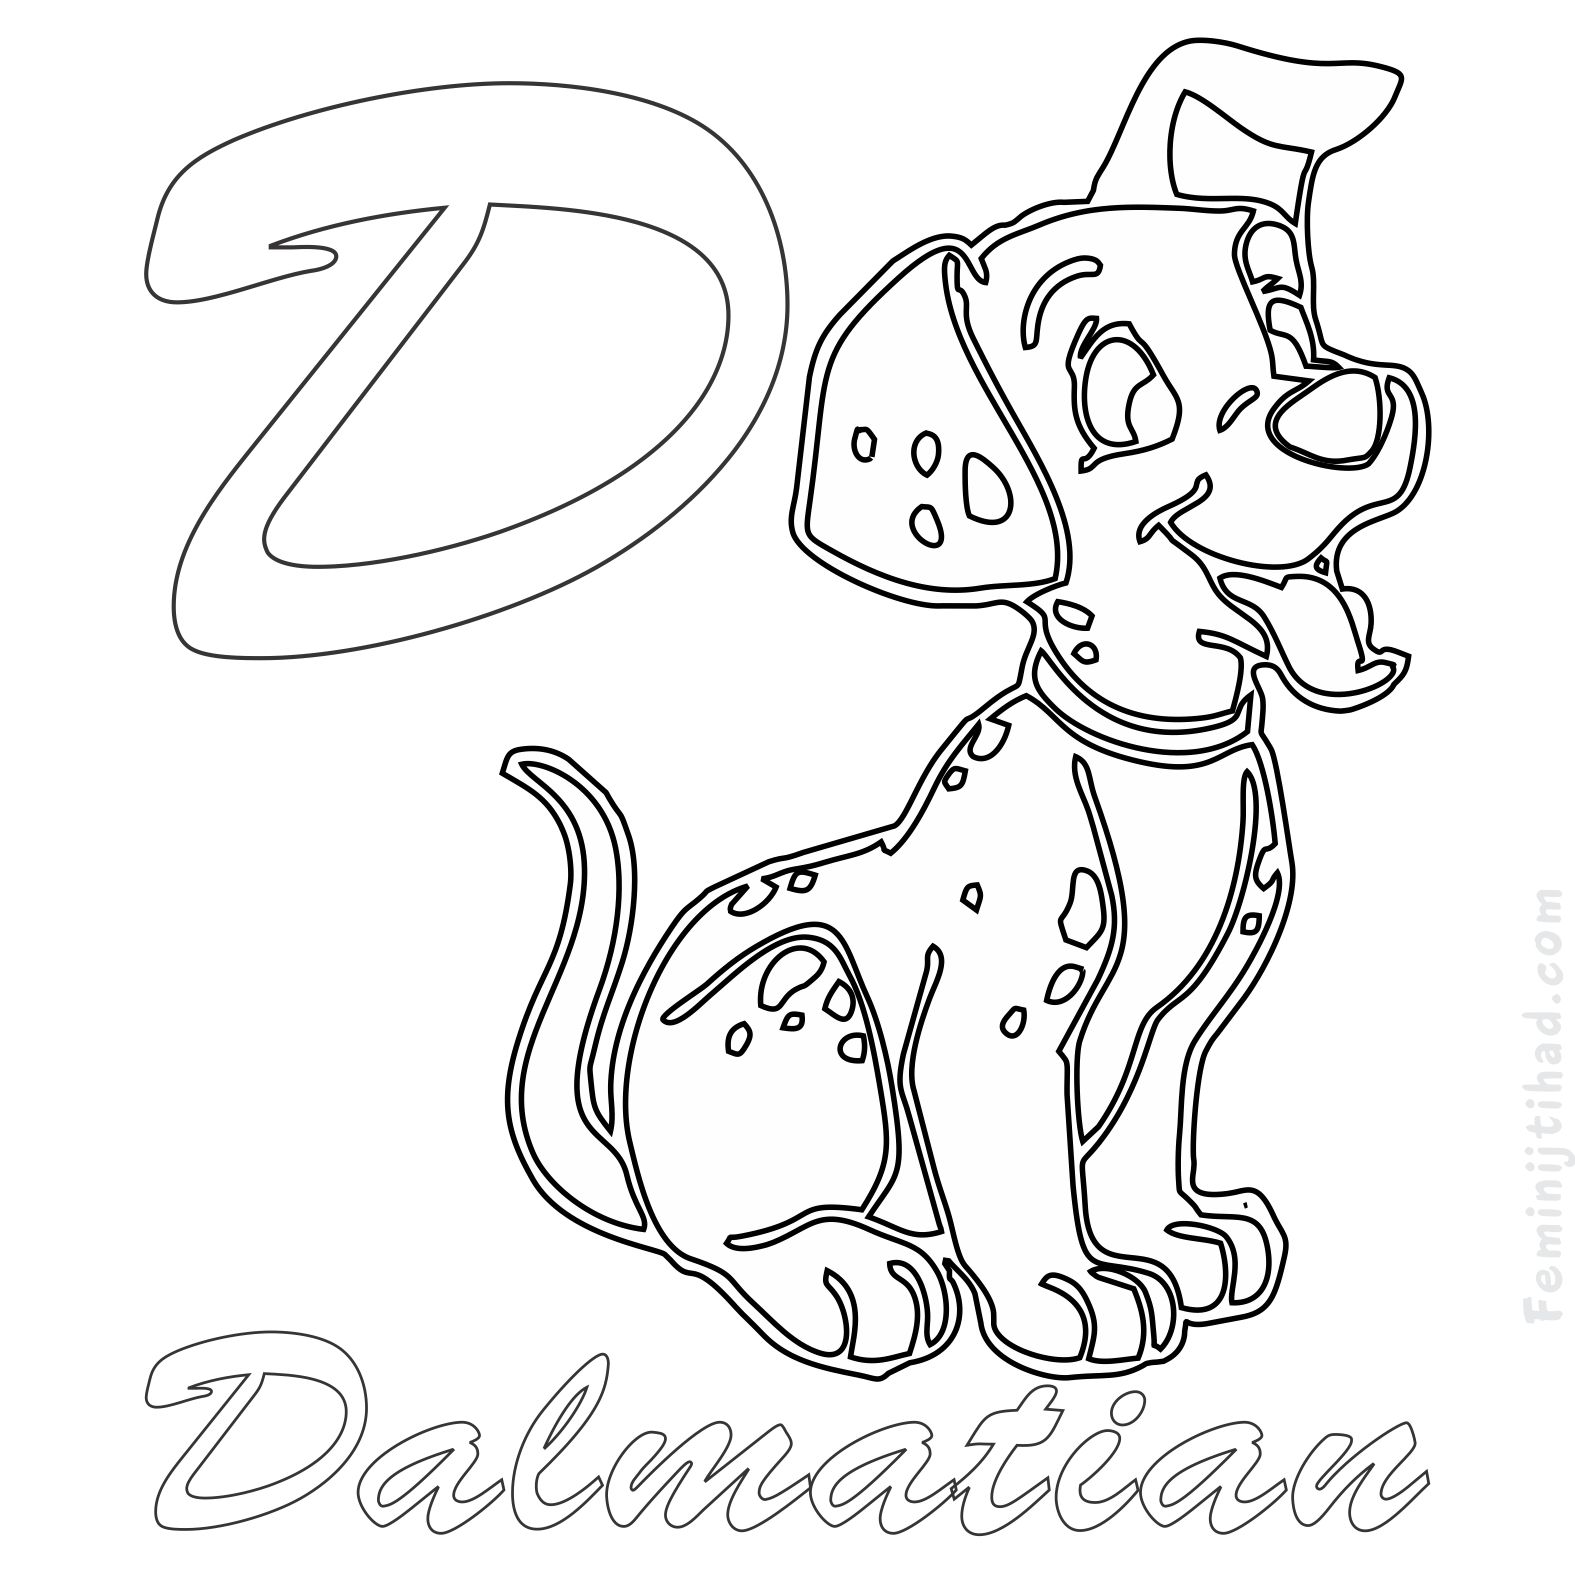 dalmatians coloring pages to print